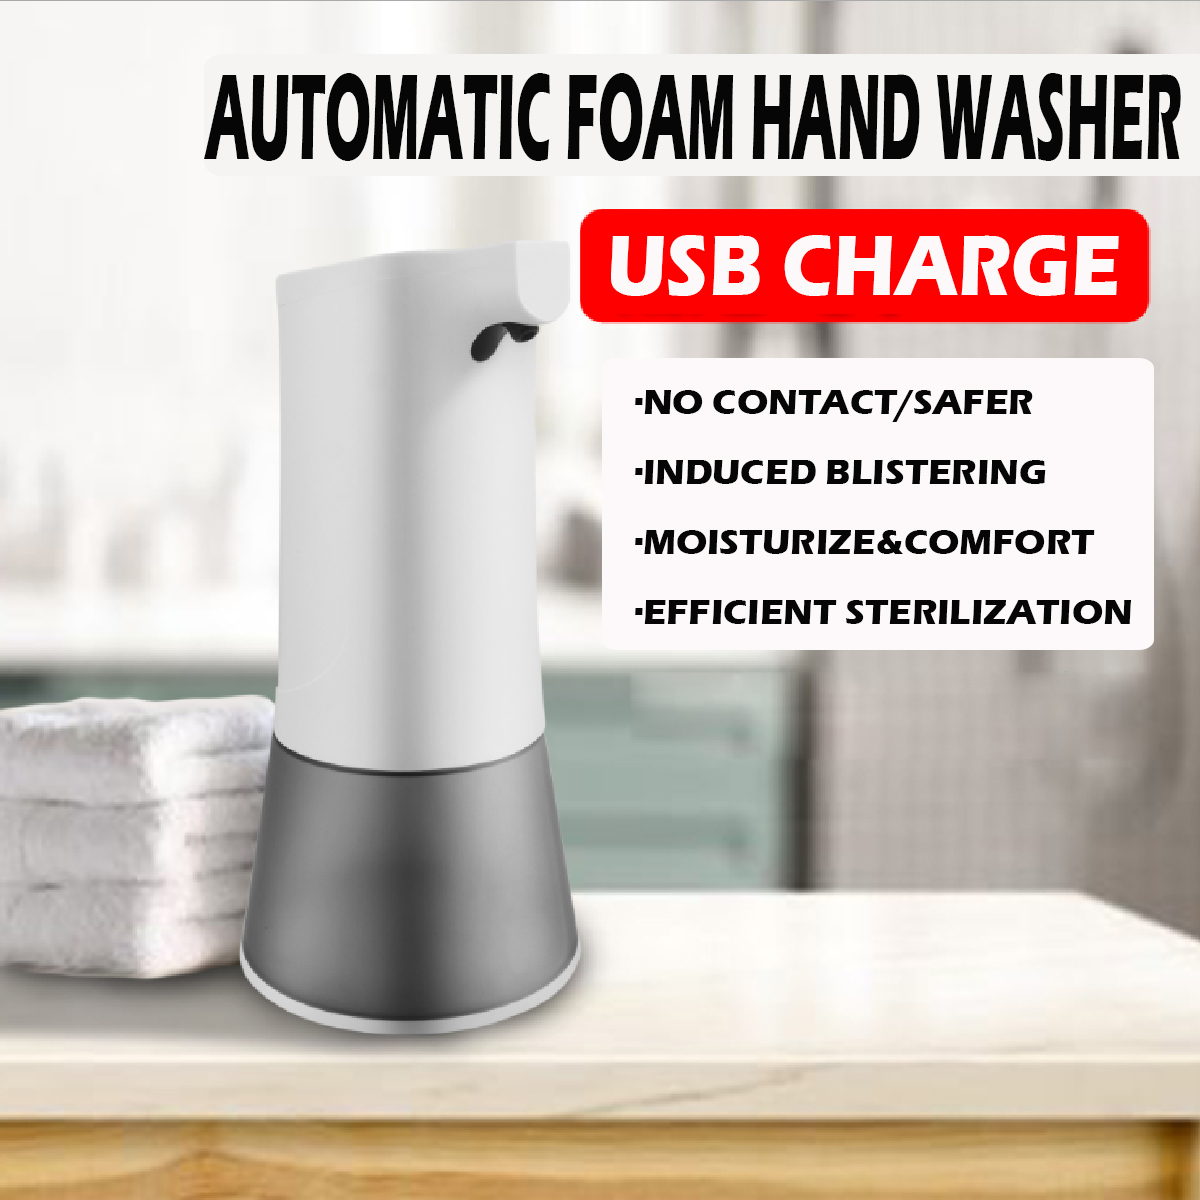 350ml-Infrared-Sensor-Automatic-Soap-Dispenser-Touchless-Stand-Foam-Hand-Washer-1669806-1